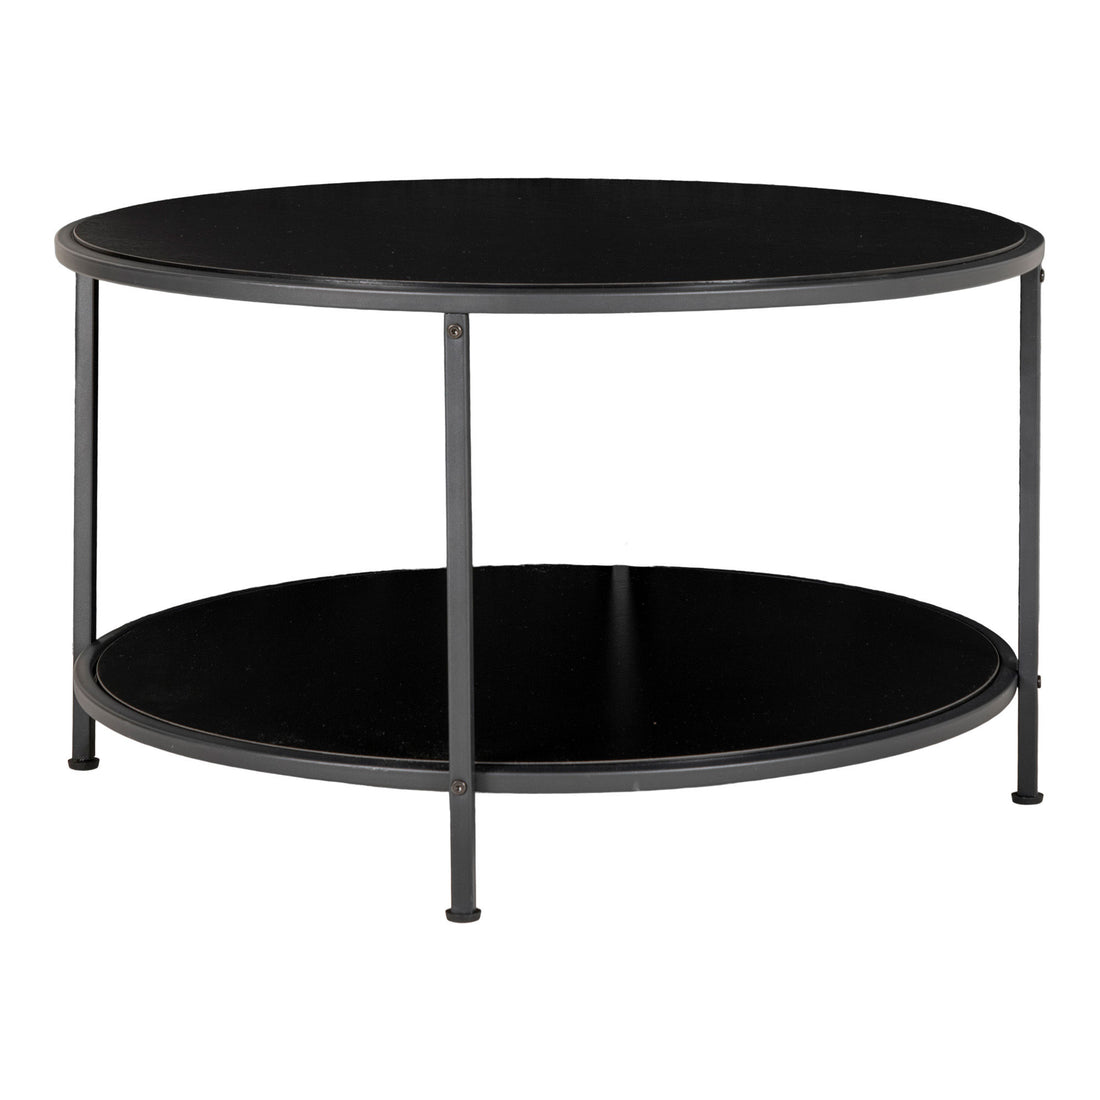 Vita Coffee table - Round coffee table with black frame and black countertops Ø80x45 cm - 1 - pcs